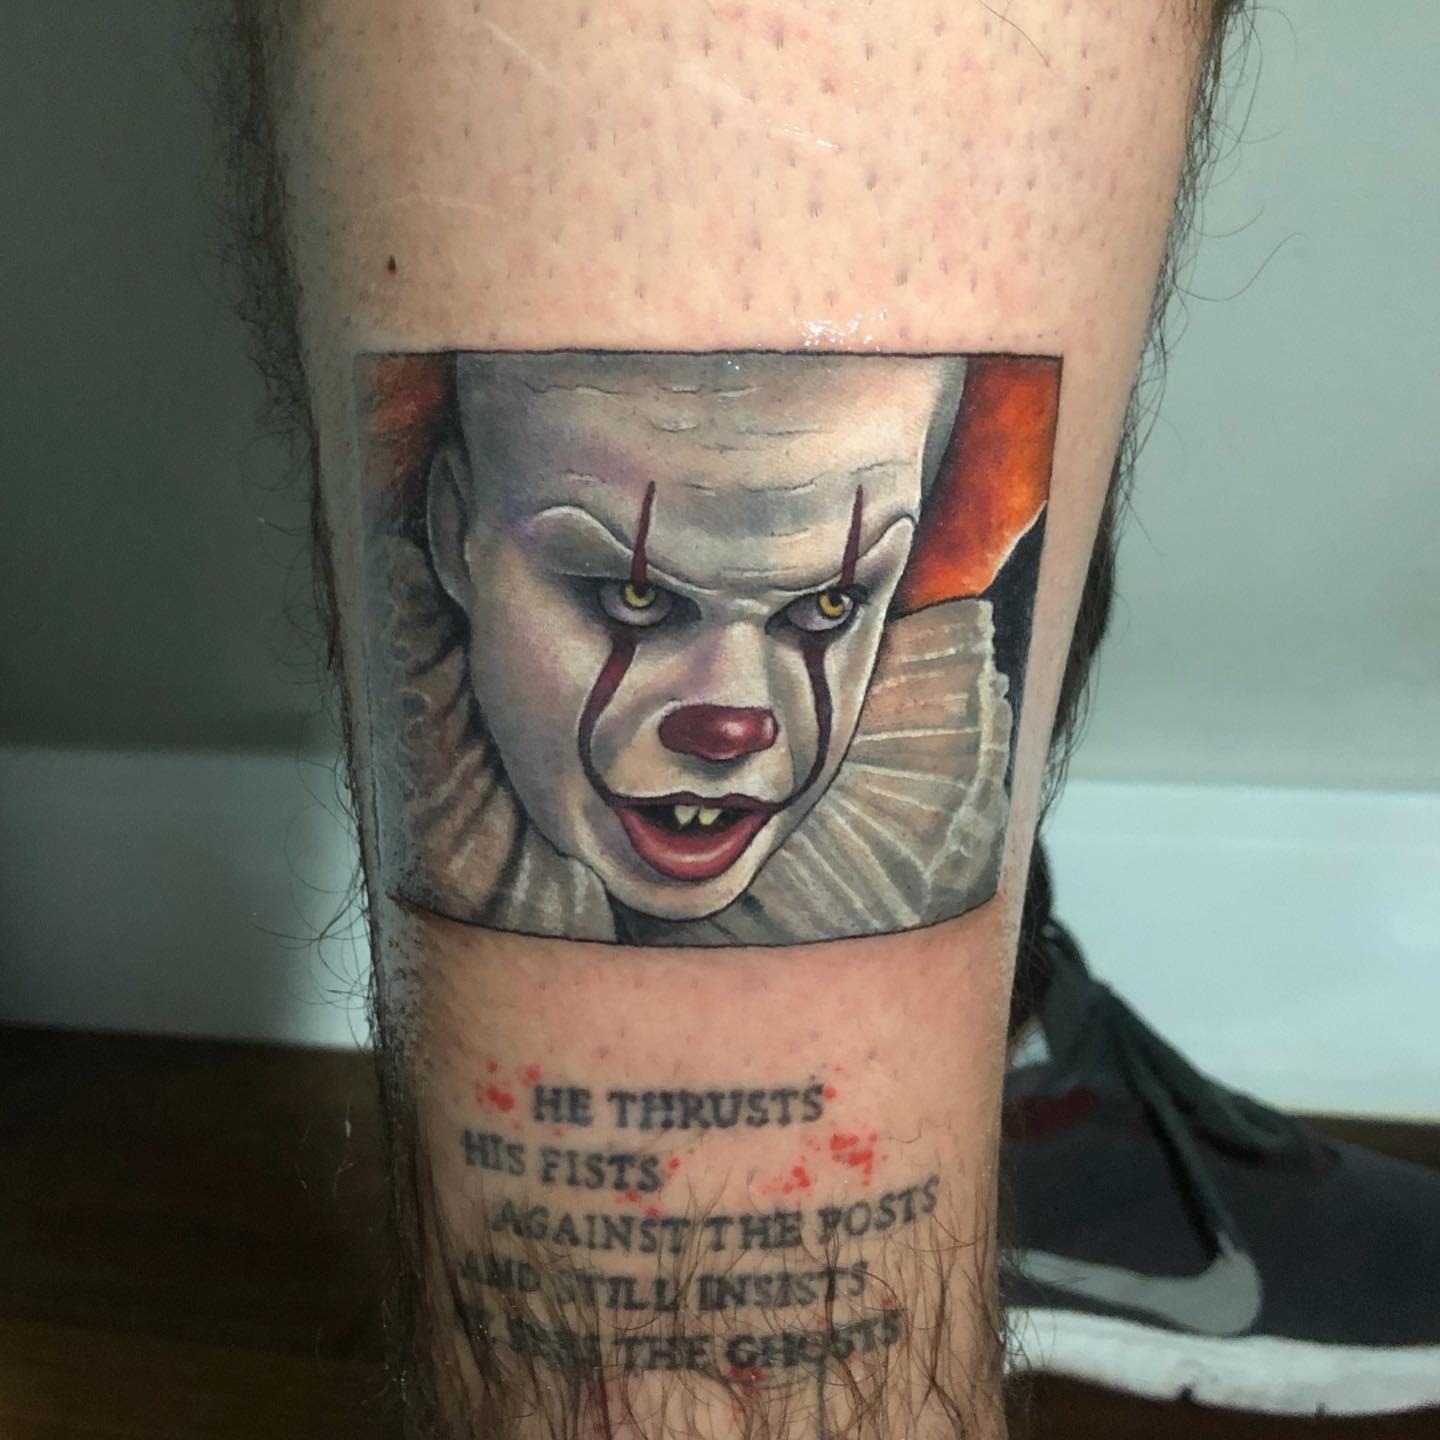 Pennywise the Dancing Clown tattoo by themagicrosa  Tattoogridnet